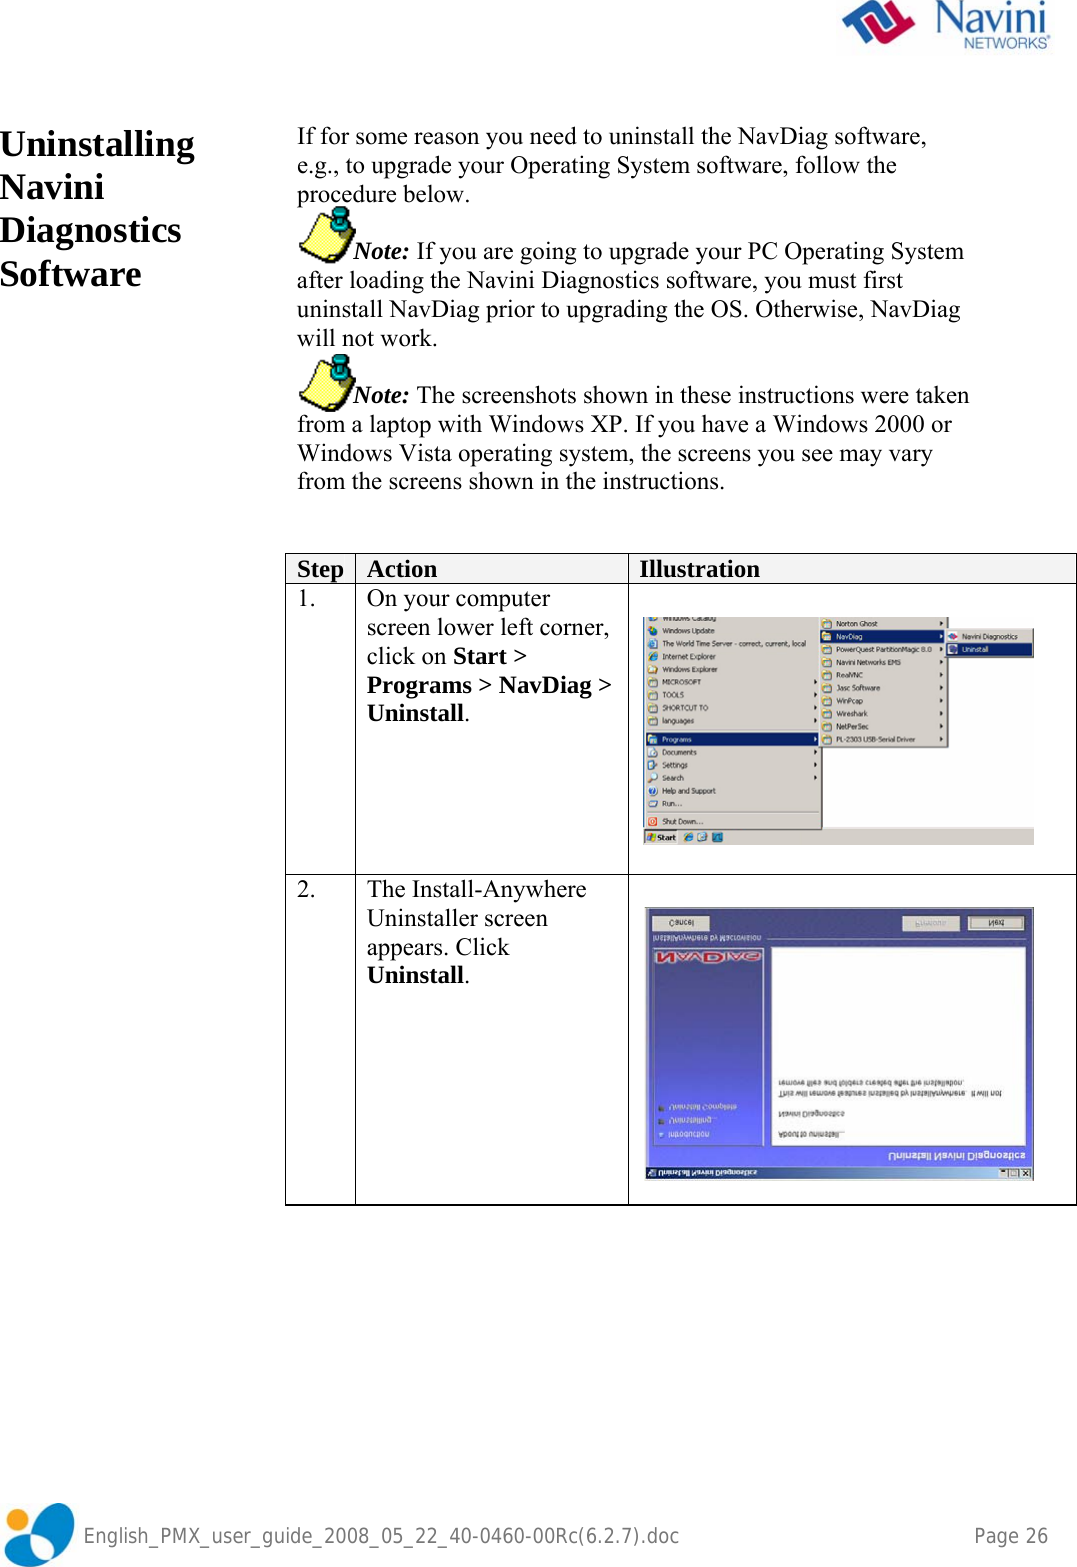               English_PMX_user_guide_2008_05_22_40-0460-00Rc(6.2.7).doc    Page 26   Uninstalling Navini Diagnostics Software       If for some reason you need to uninstall the NavDiag software, e.g., to upgrade your Operating System software, follow the procedure below.            Note: If you are going to upgrade your PC Operating System after loading the Navini Diagnostics software, you must first uninstall NavDiag prior to upgrading the OS. Otherwise, NavDiag will not work.            Note: The screenshots shown in these instructions were taken from a laptop with Windows XP. If you have a Windows 2000 or Windows Vista operating system, the screens you see may vary from the screens shown in the instructions.   Step  Action  Illustration 1.  On your computer screen lower left corner, click on Start &gt; Programs &gt; NavDiag &gt; Uninstall.   2. The Install-Anywhere Uninstaller screen appears. Click Uninstall.     